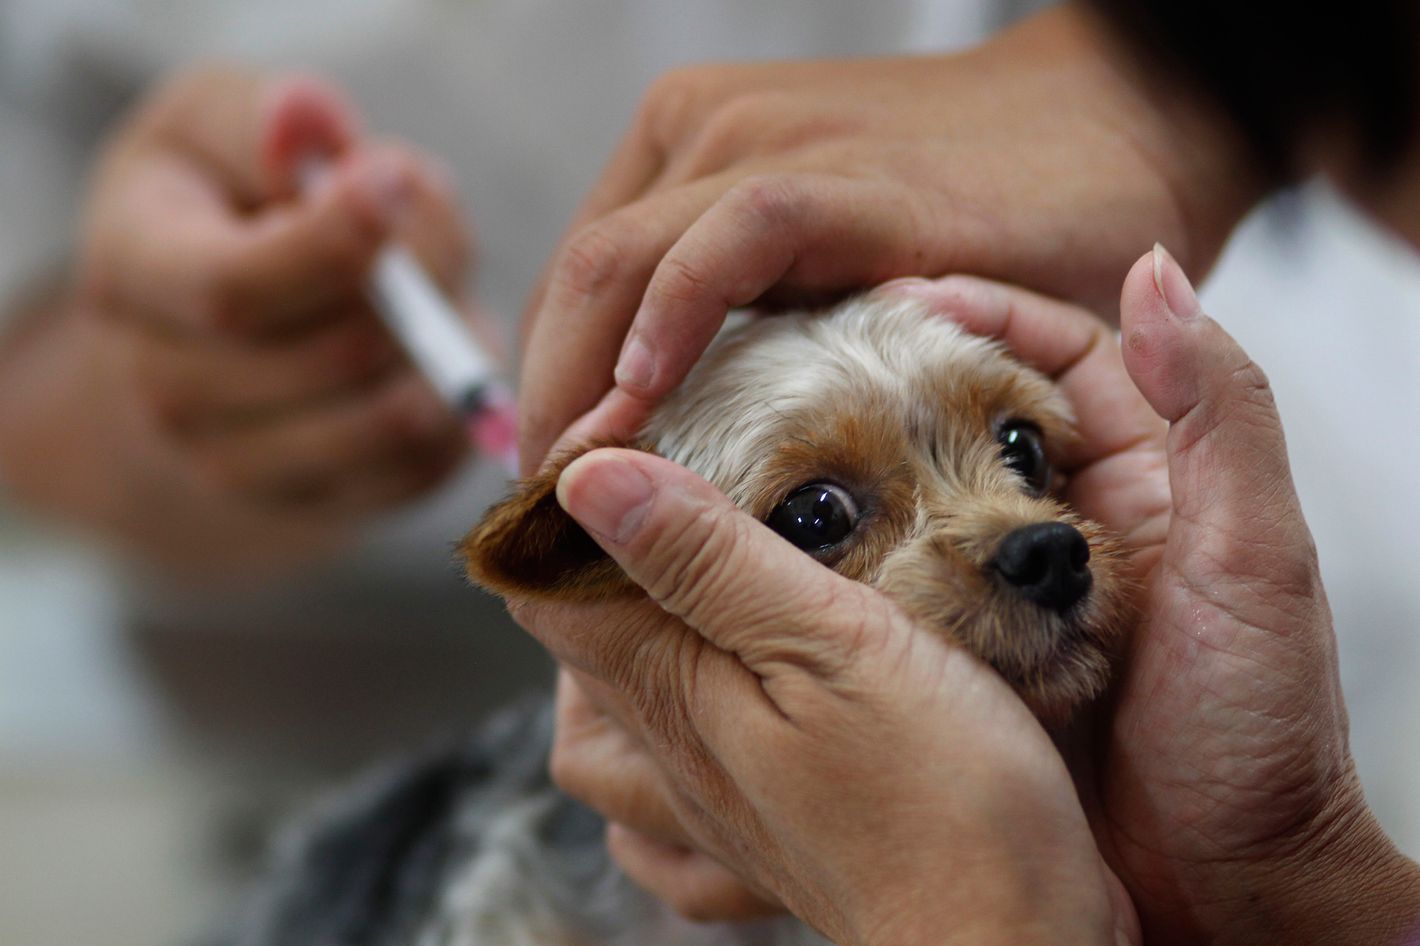 should a dog be vaccinated every year